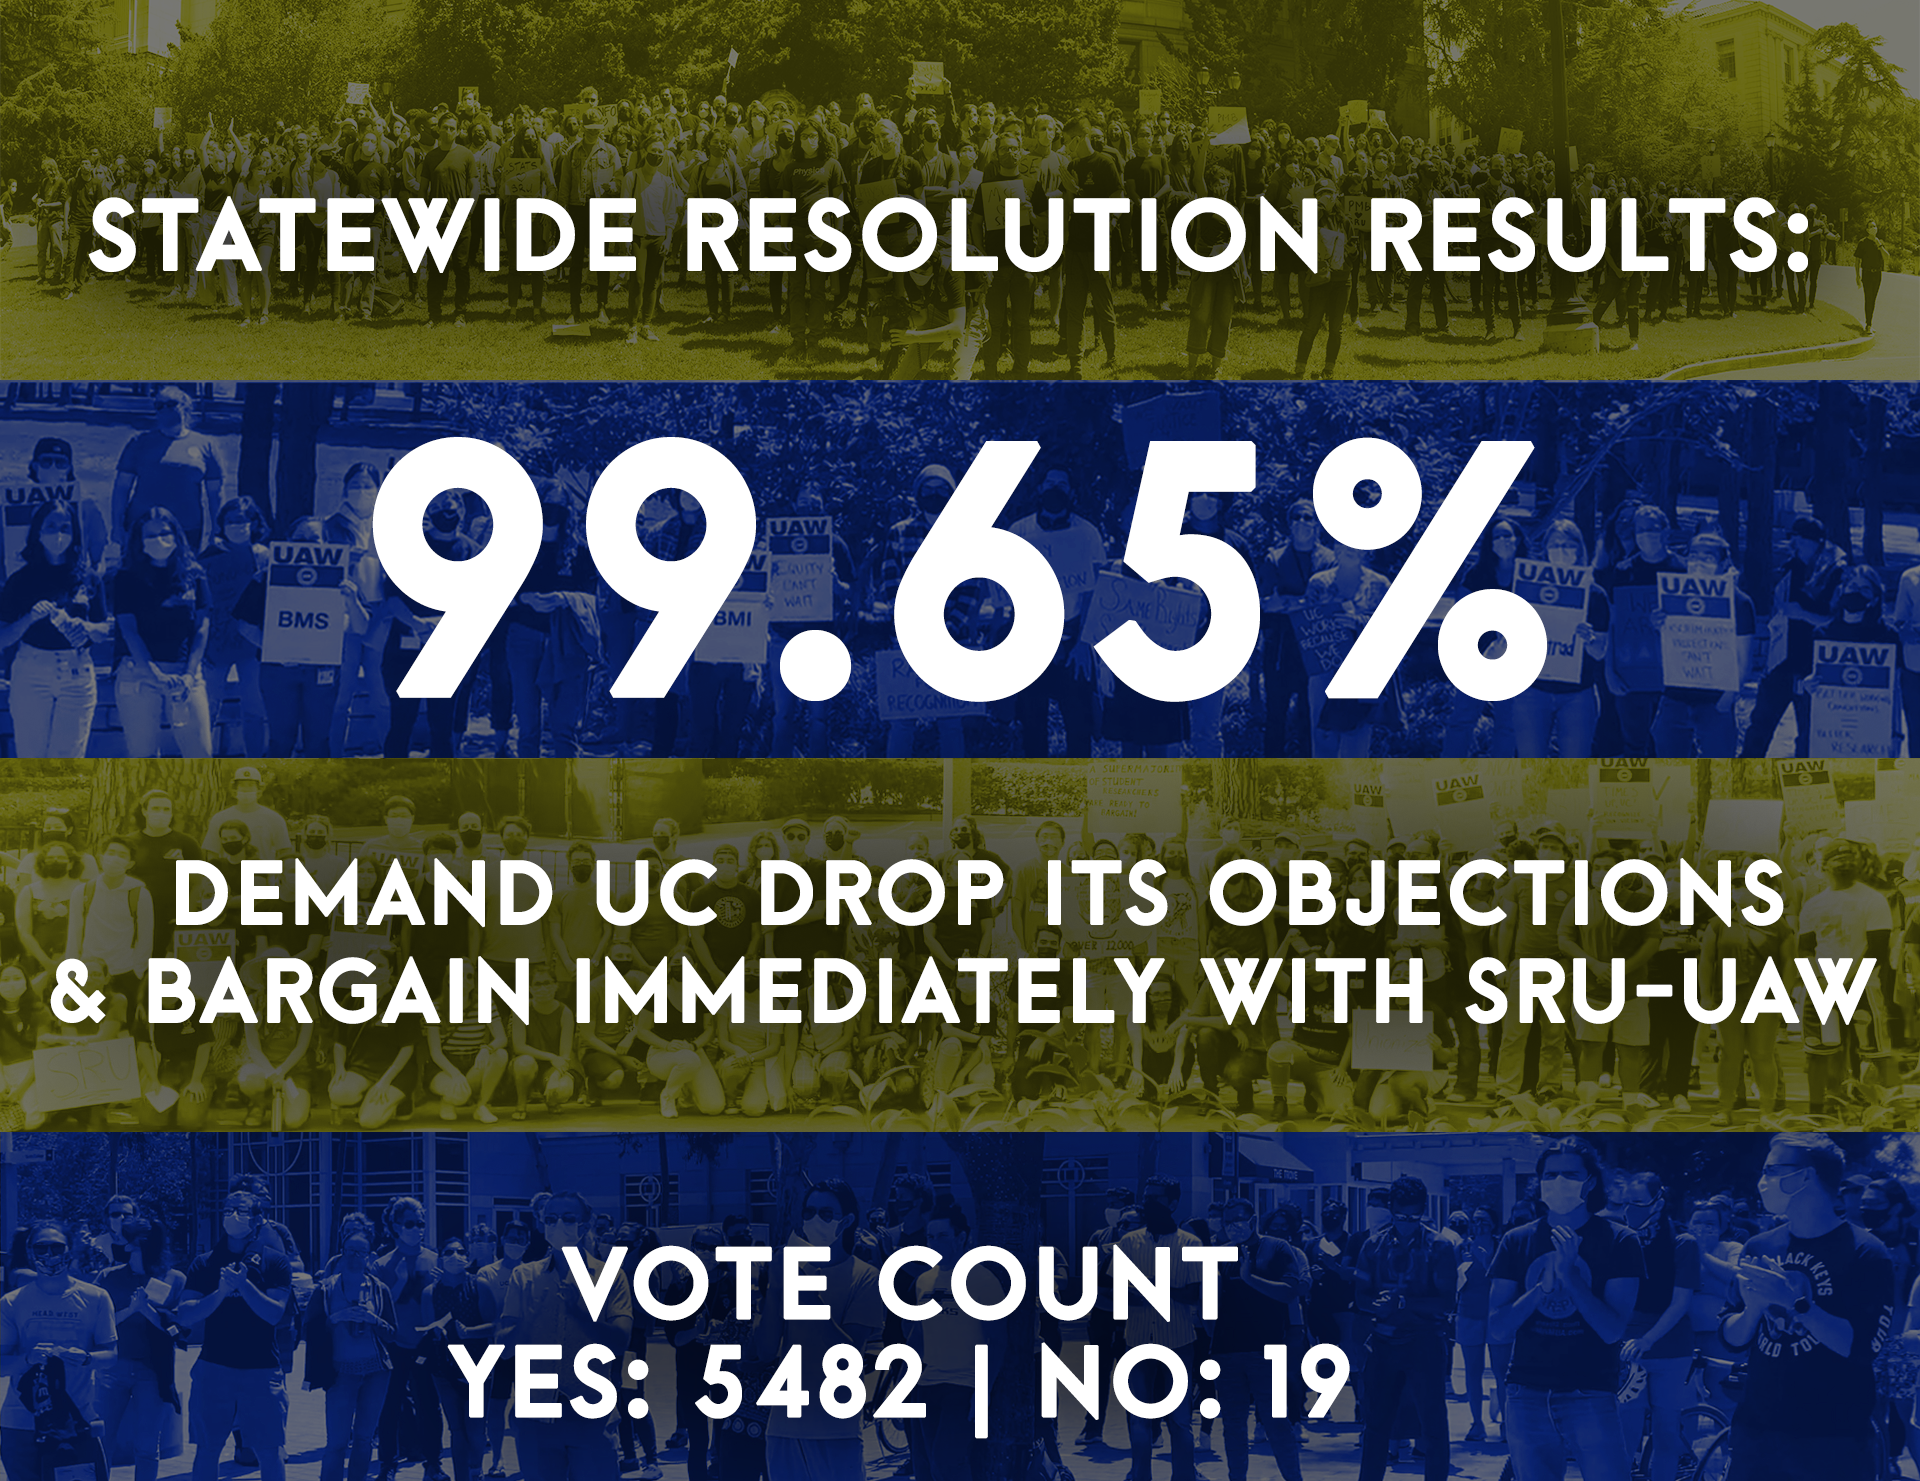 A graphic showing text that reads, "Statewide resolution results: 99.65% demand UC drop its objections & bargain immediately with SRU-UAW. Vote Count - Yes: 5482, No: 19." The text is set in front of four panoramic images showing SRs holding signs at past SRU-UAW actions.